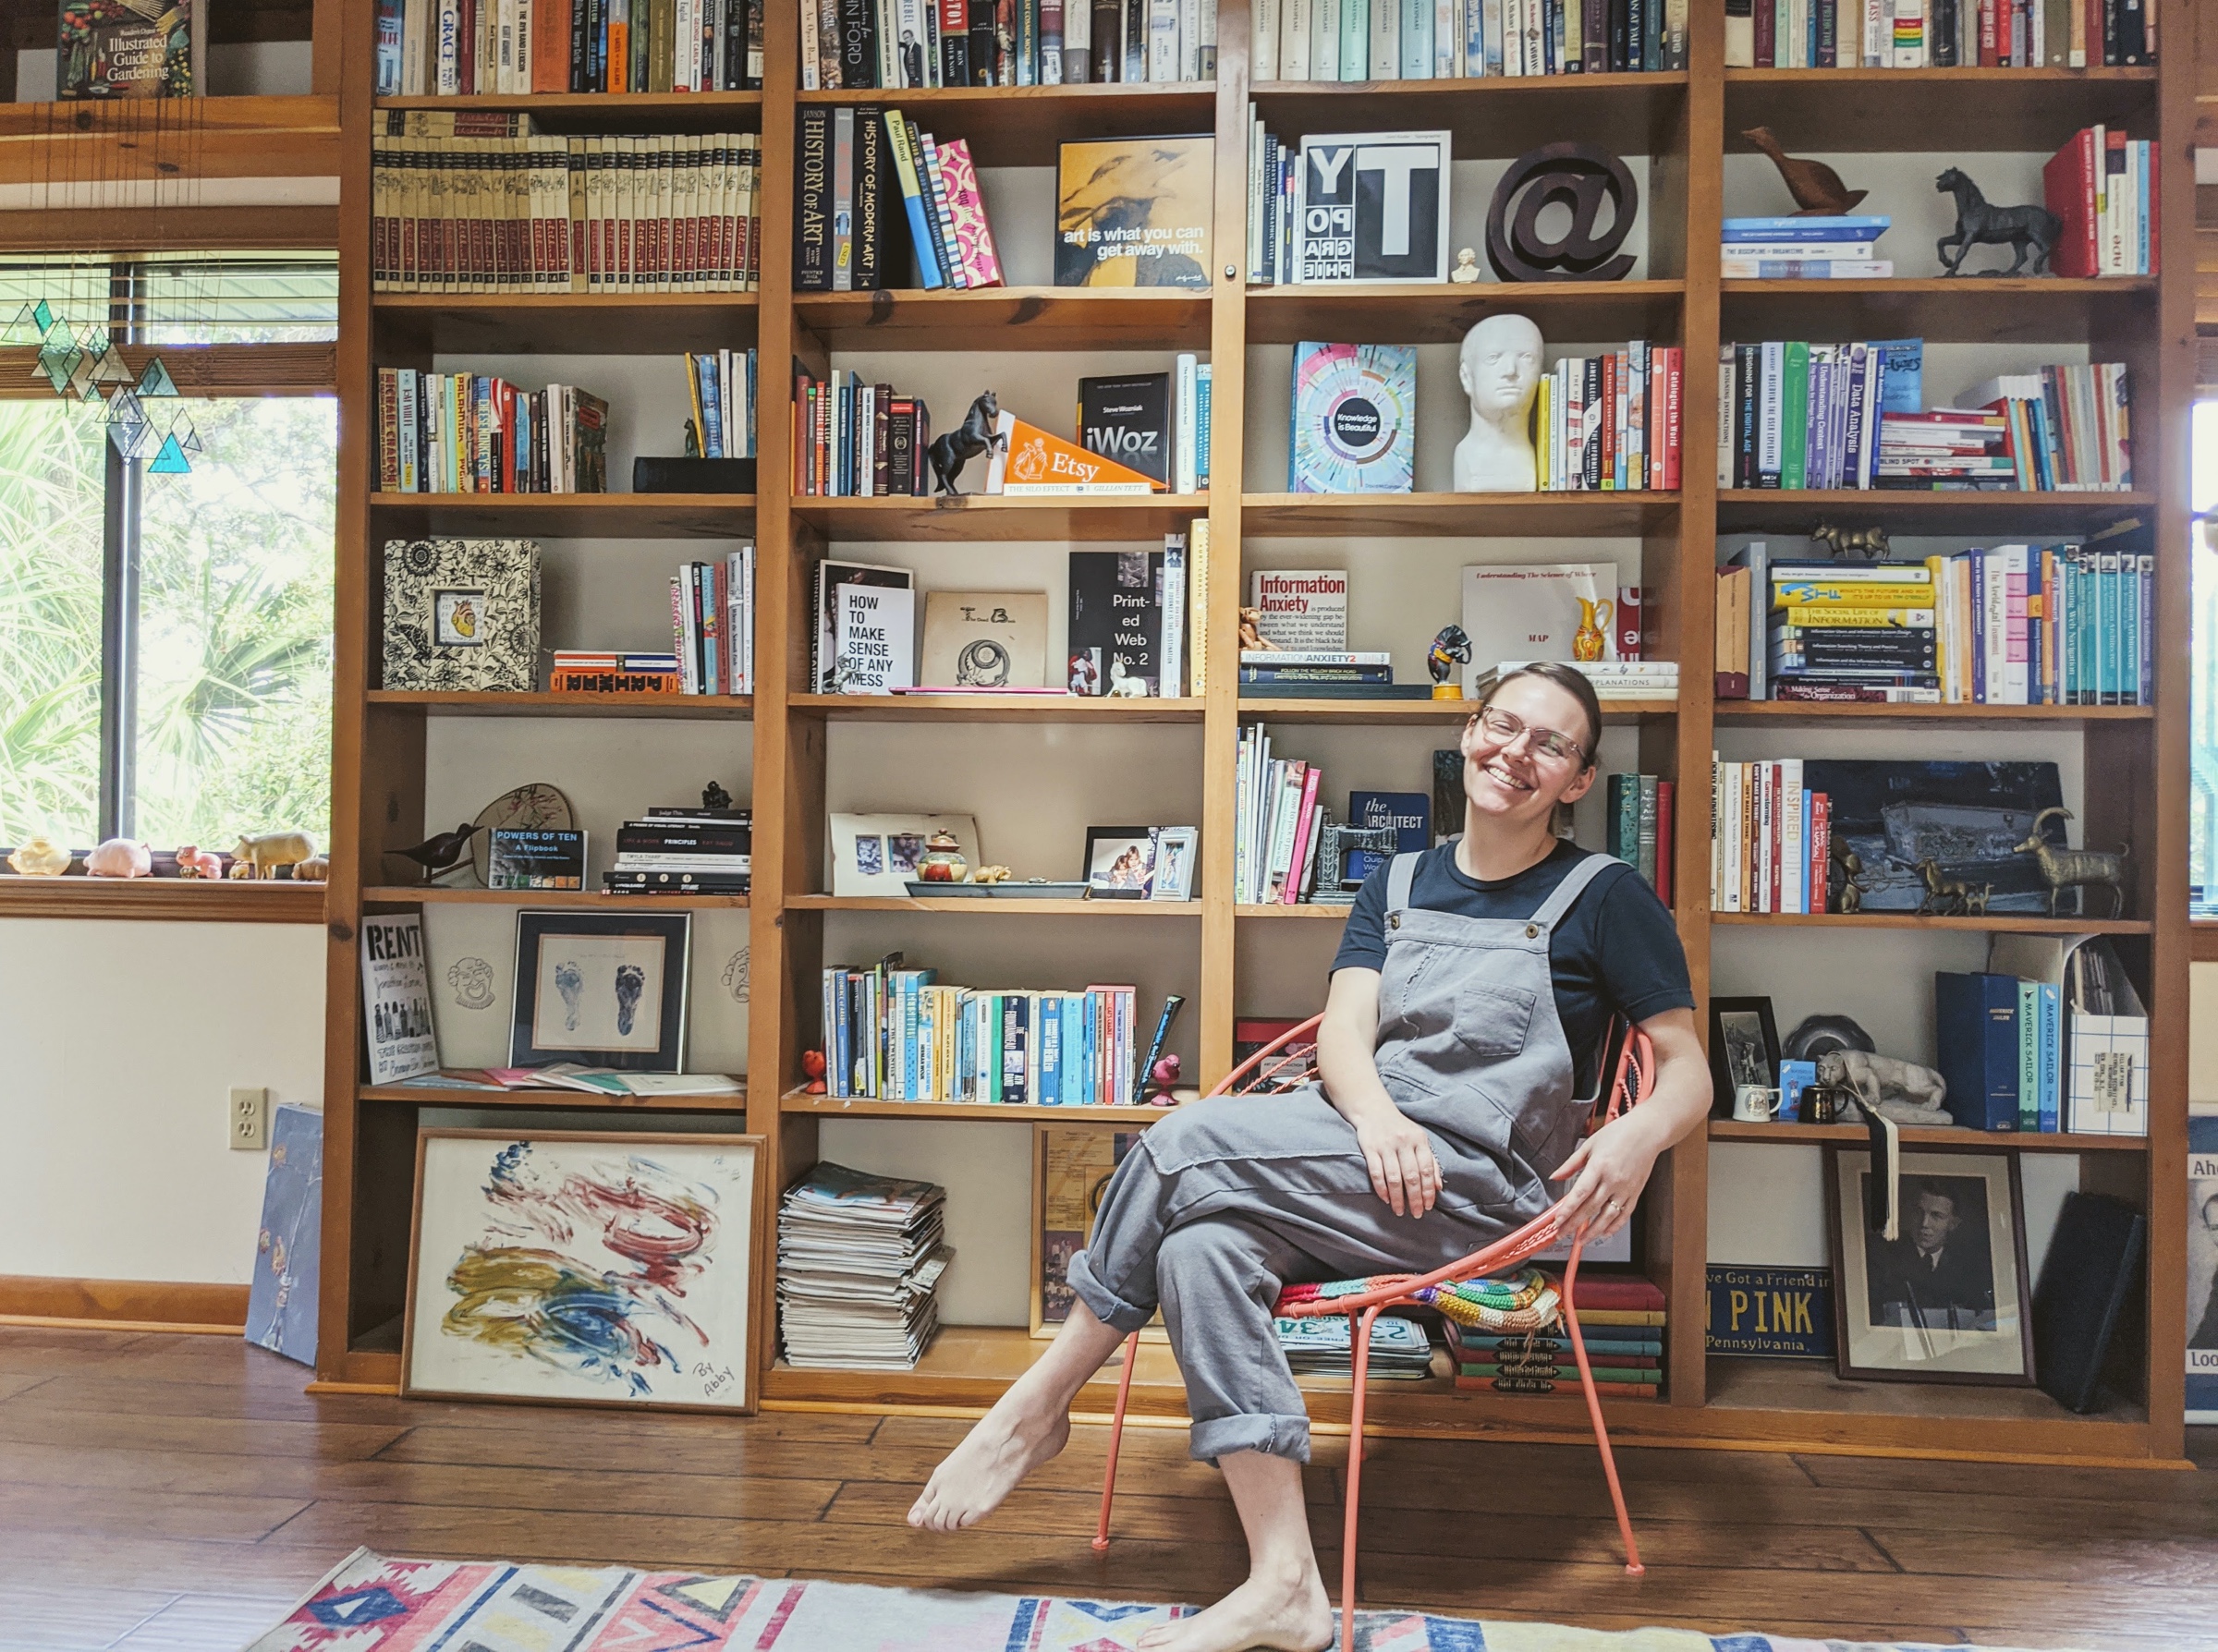 A picture of Abby Covert at home in her studio, amongst her books many of which are about information architecture and design